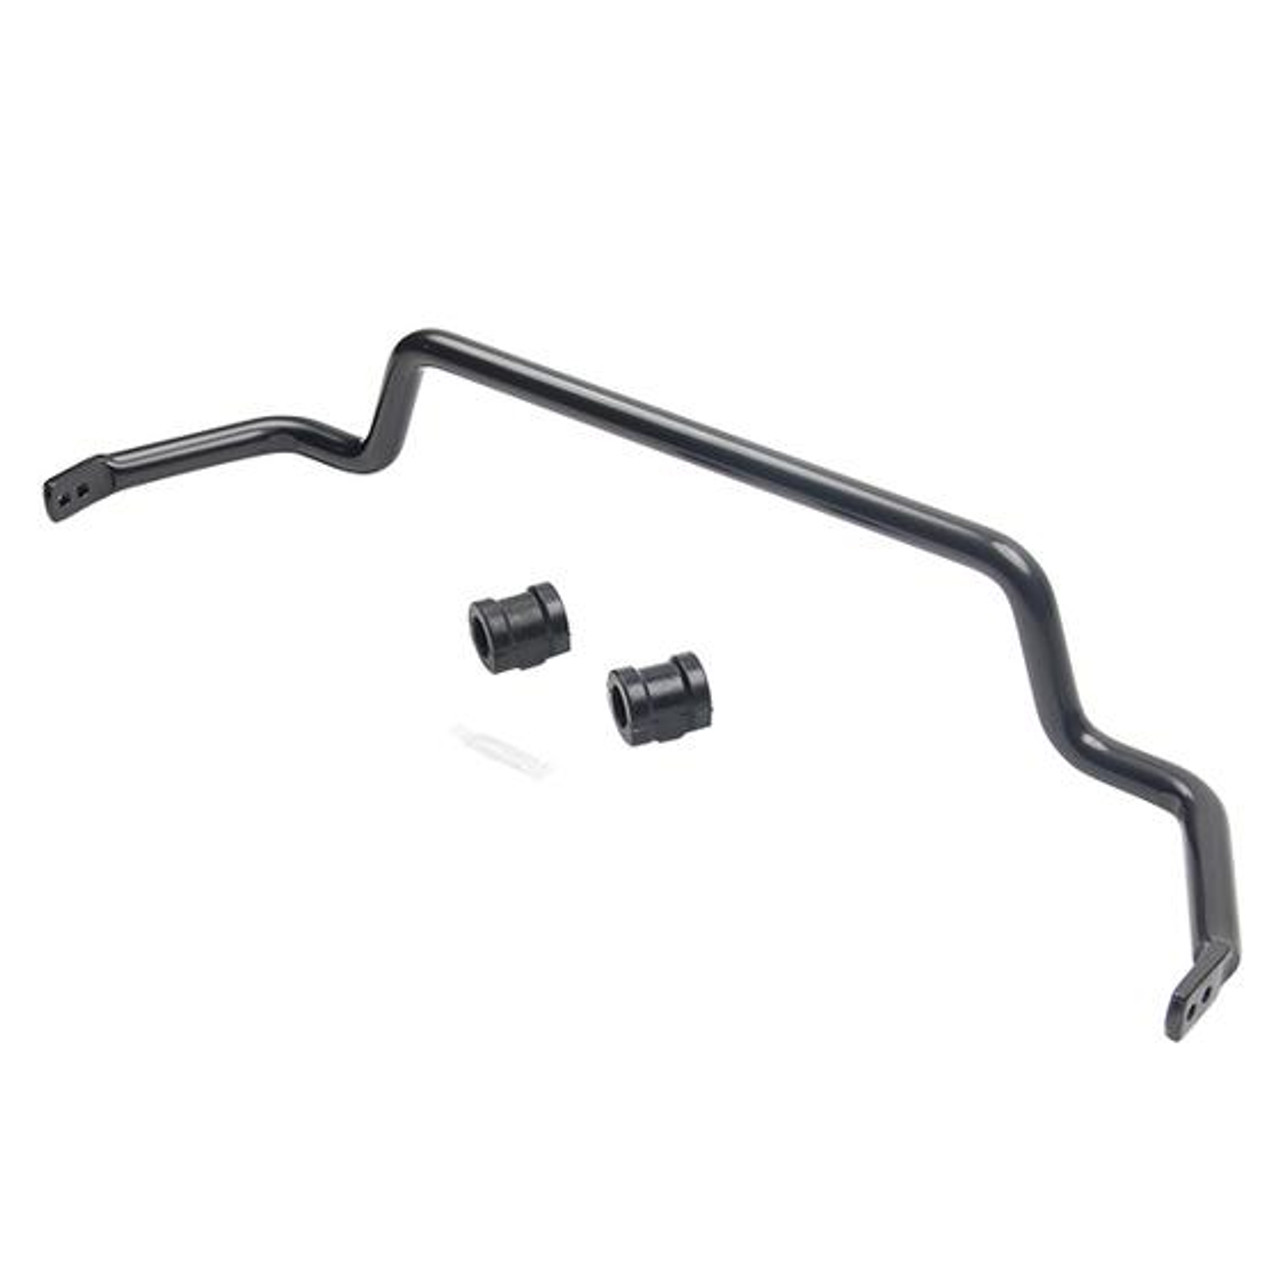 BMW Front Anti-Sway Bar - ST Suspensions 50306